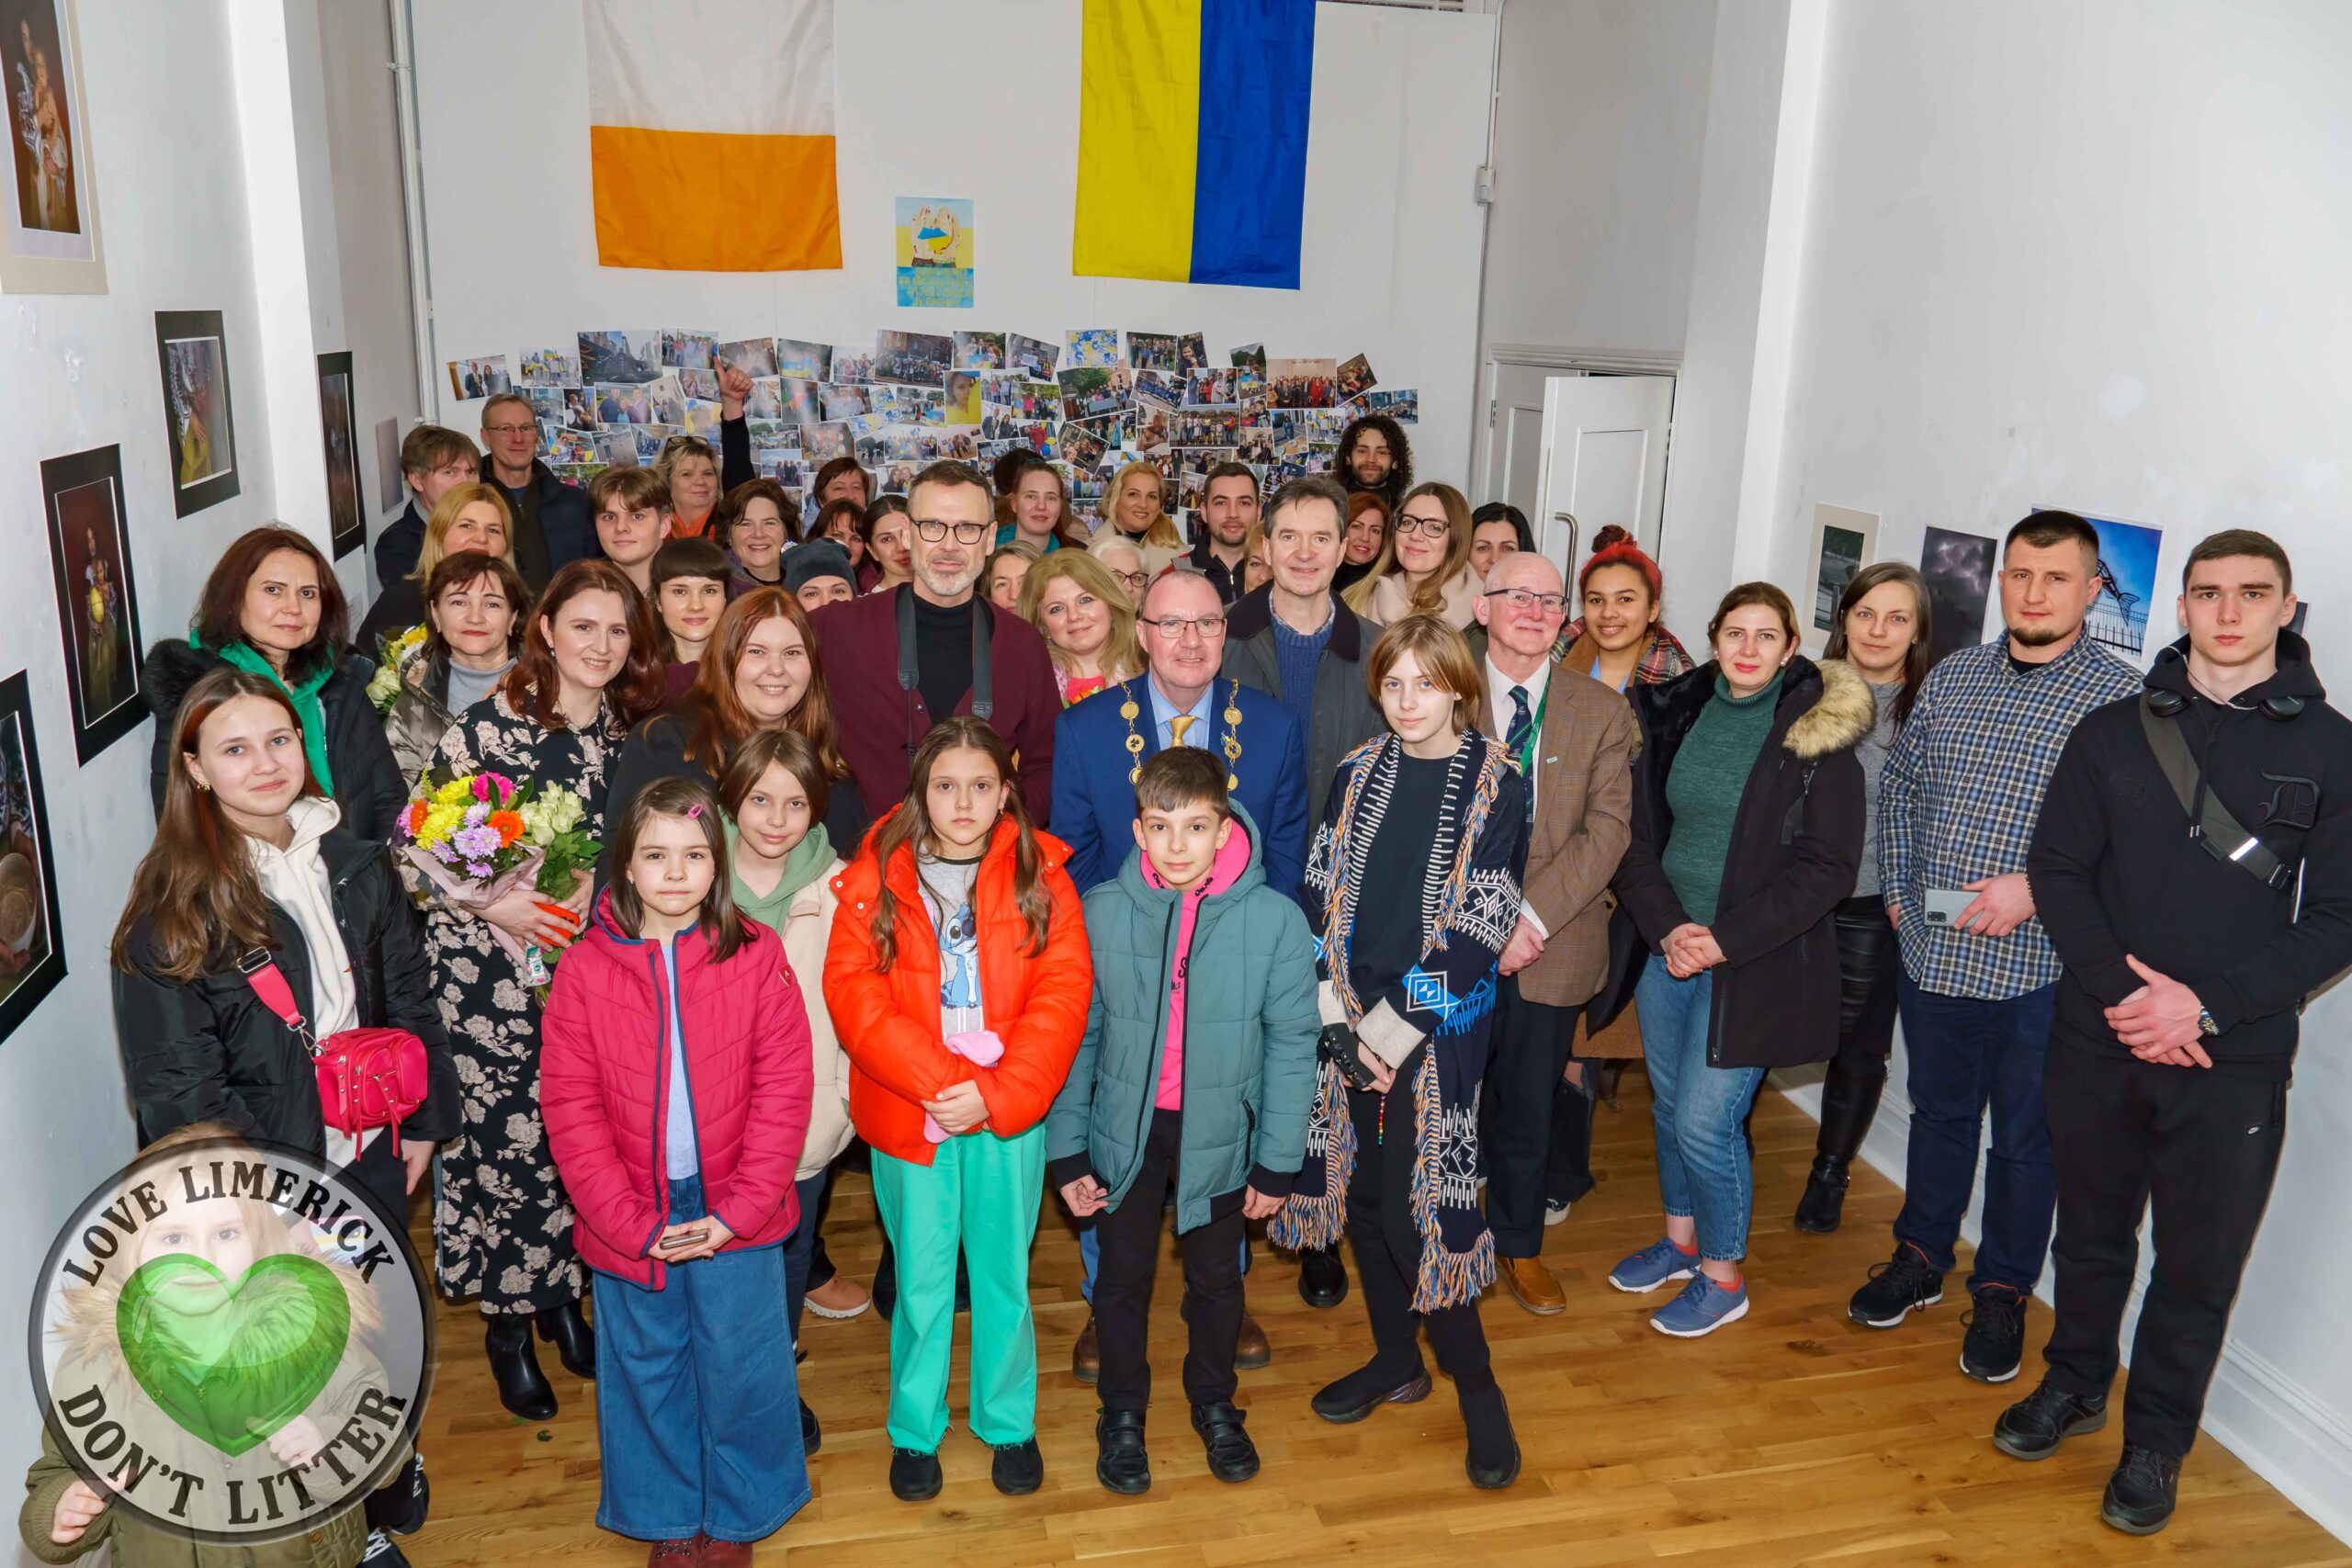 The With Faith exhibition, running at the Limerick Museum until February 28, 2023, features the photography works of Olena Oleksiienko and Kateryna Vyshemirska